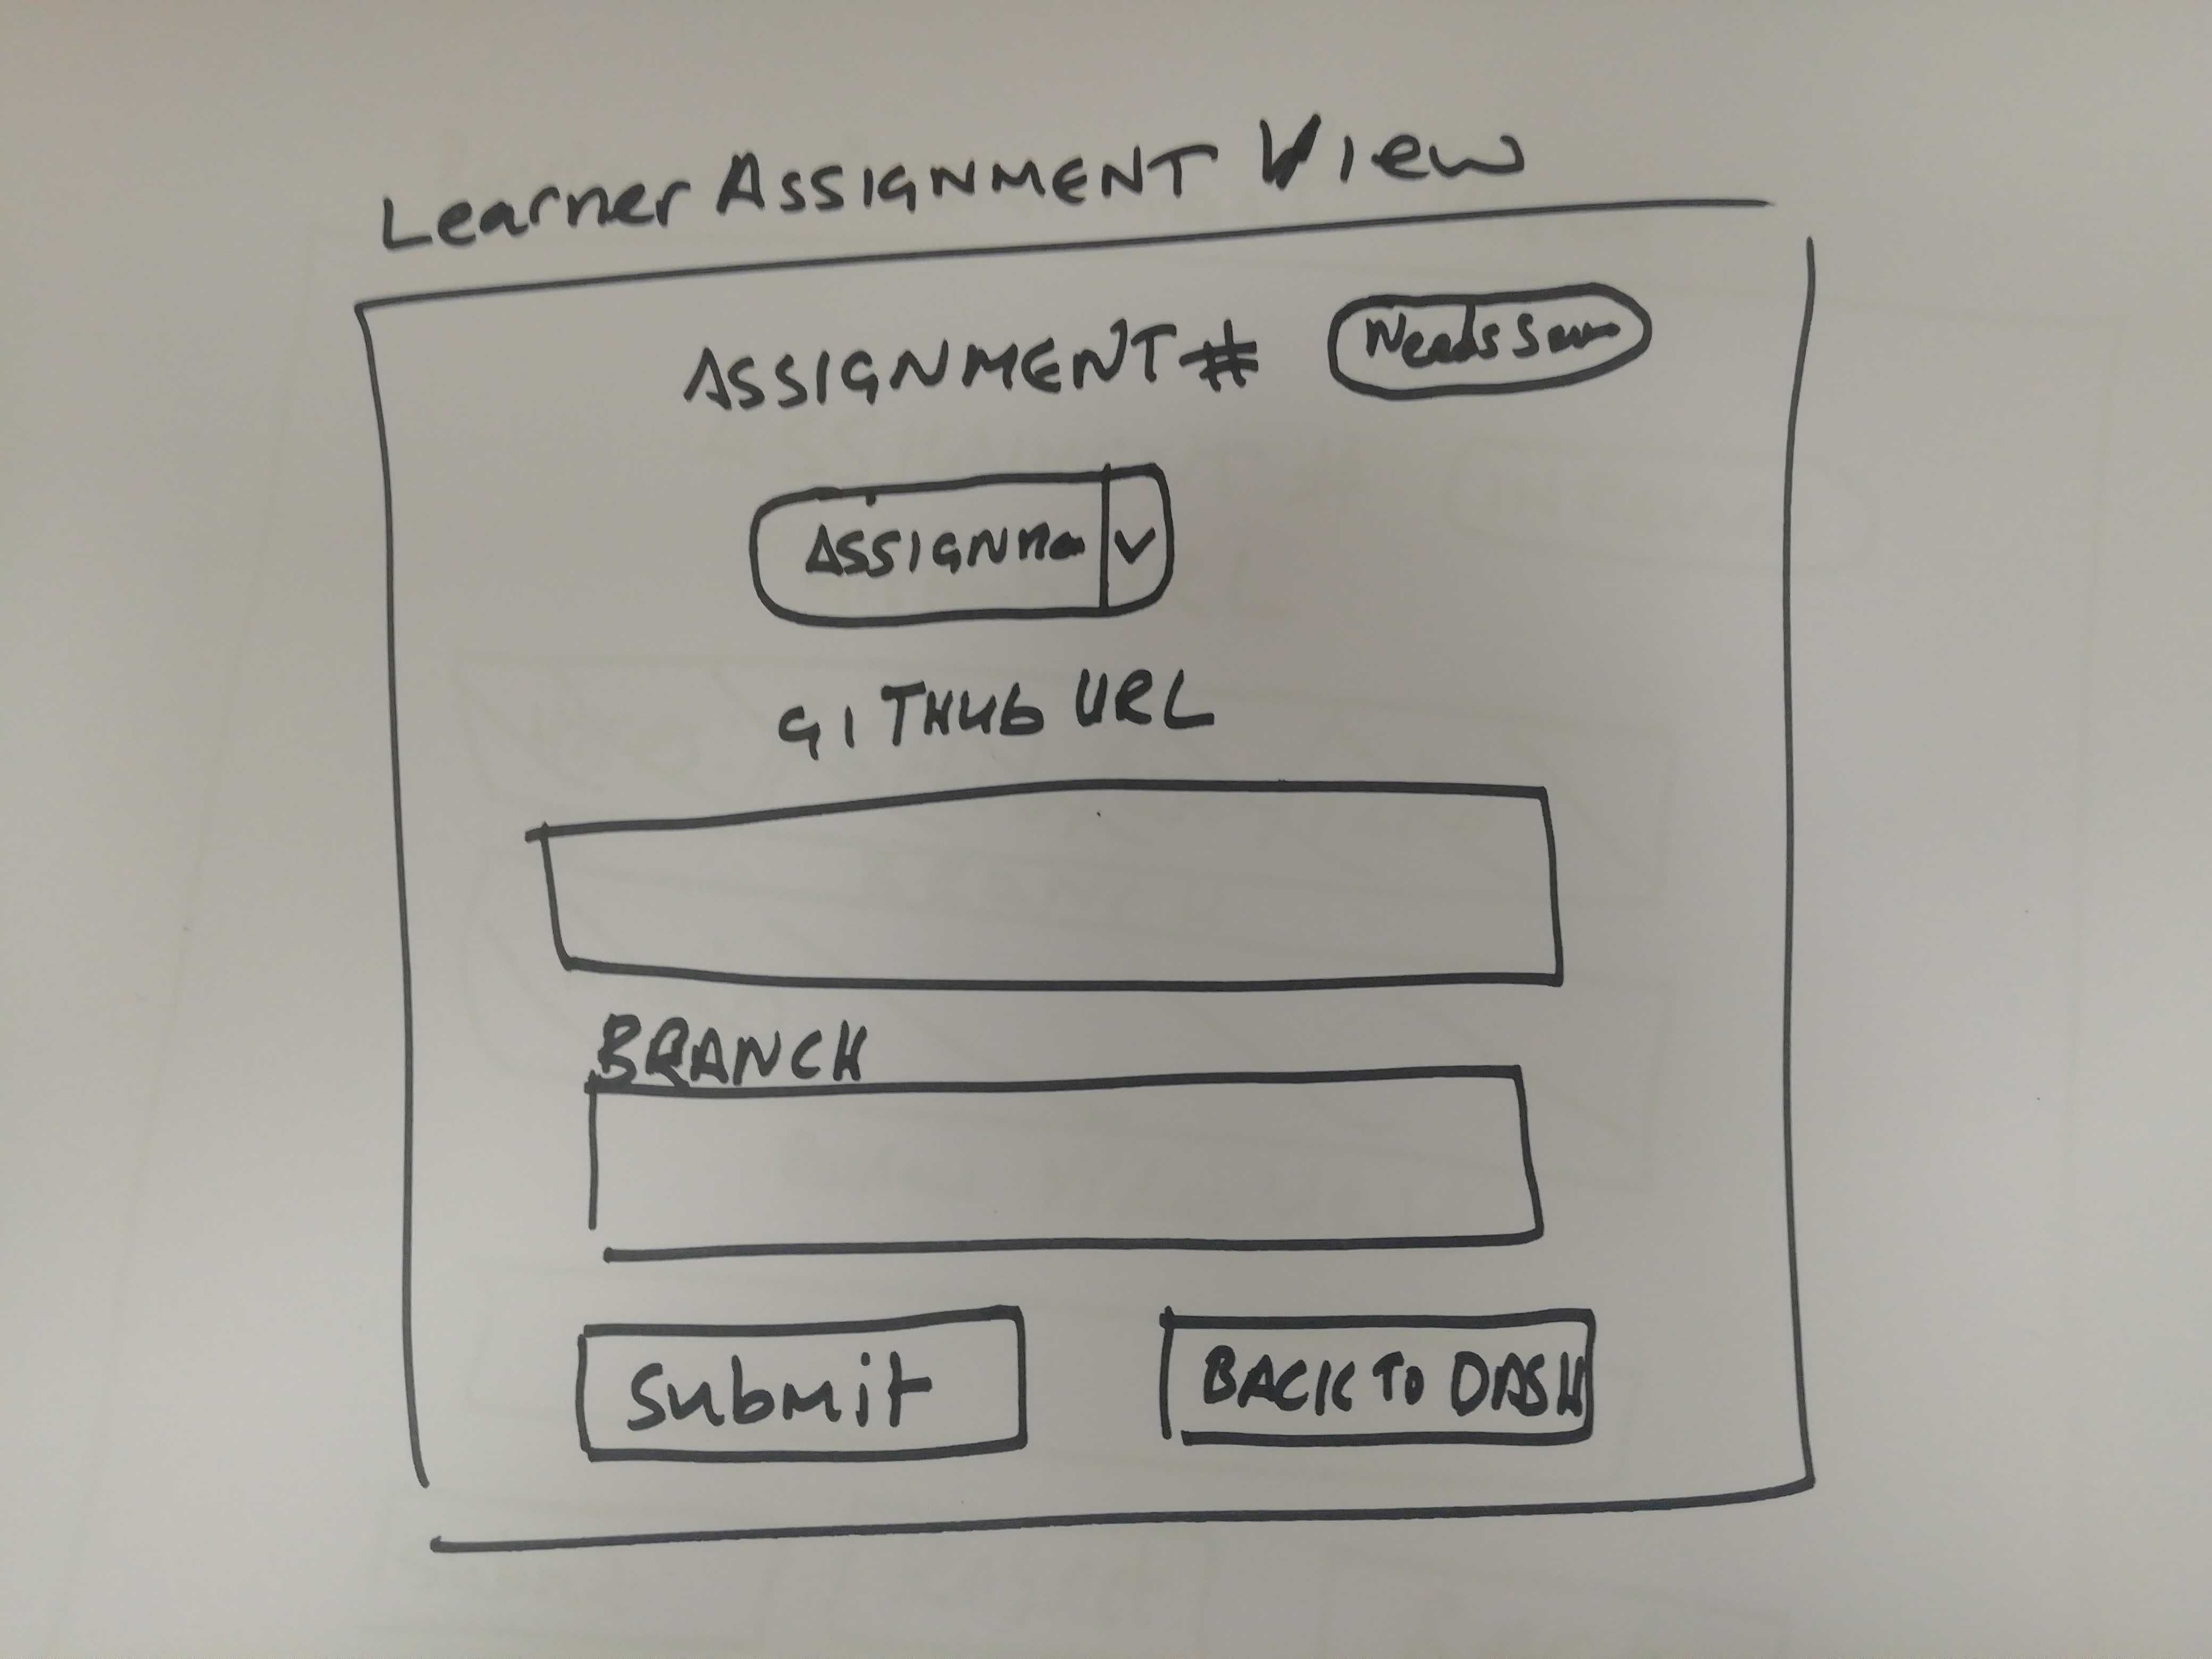 Learner assignment detail - wireframe